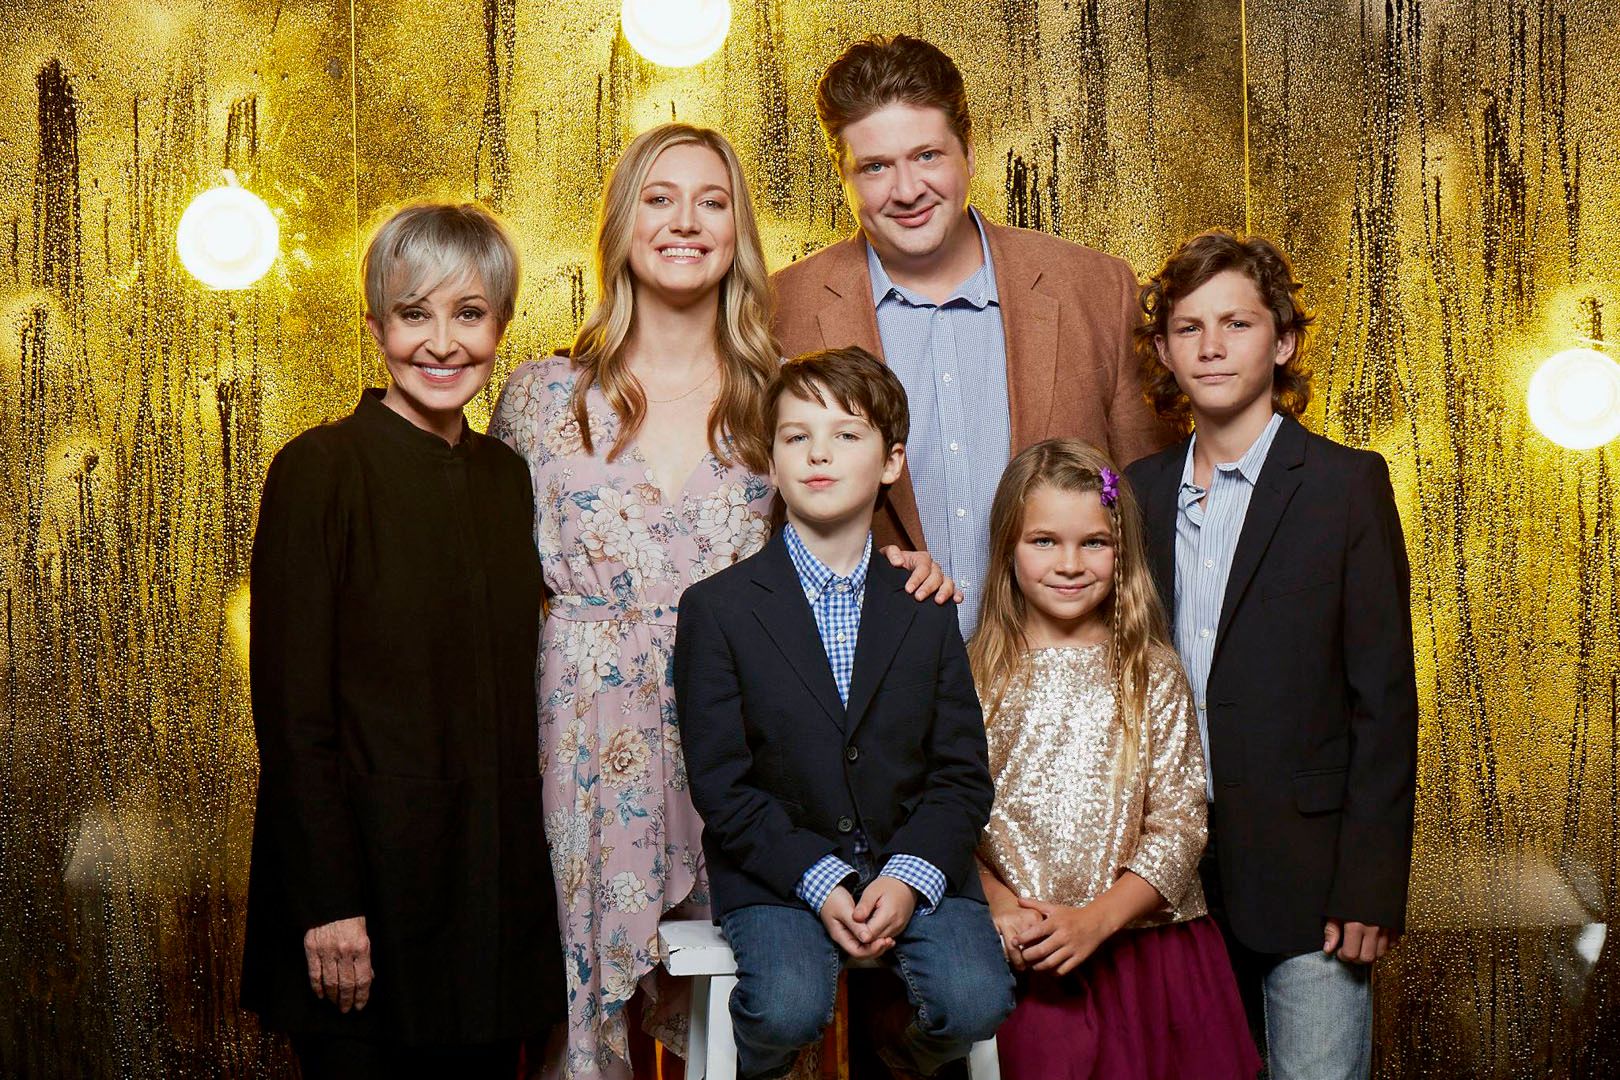 The cast of Young Sheldon poses for a family portrait.